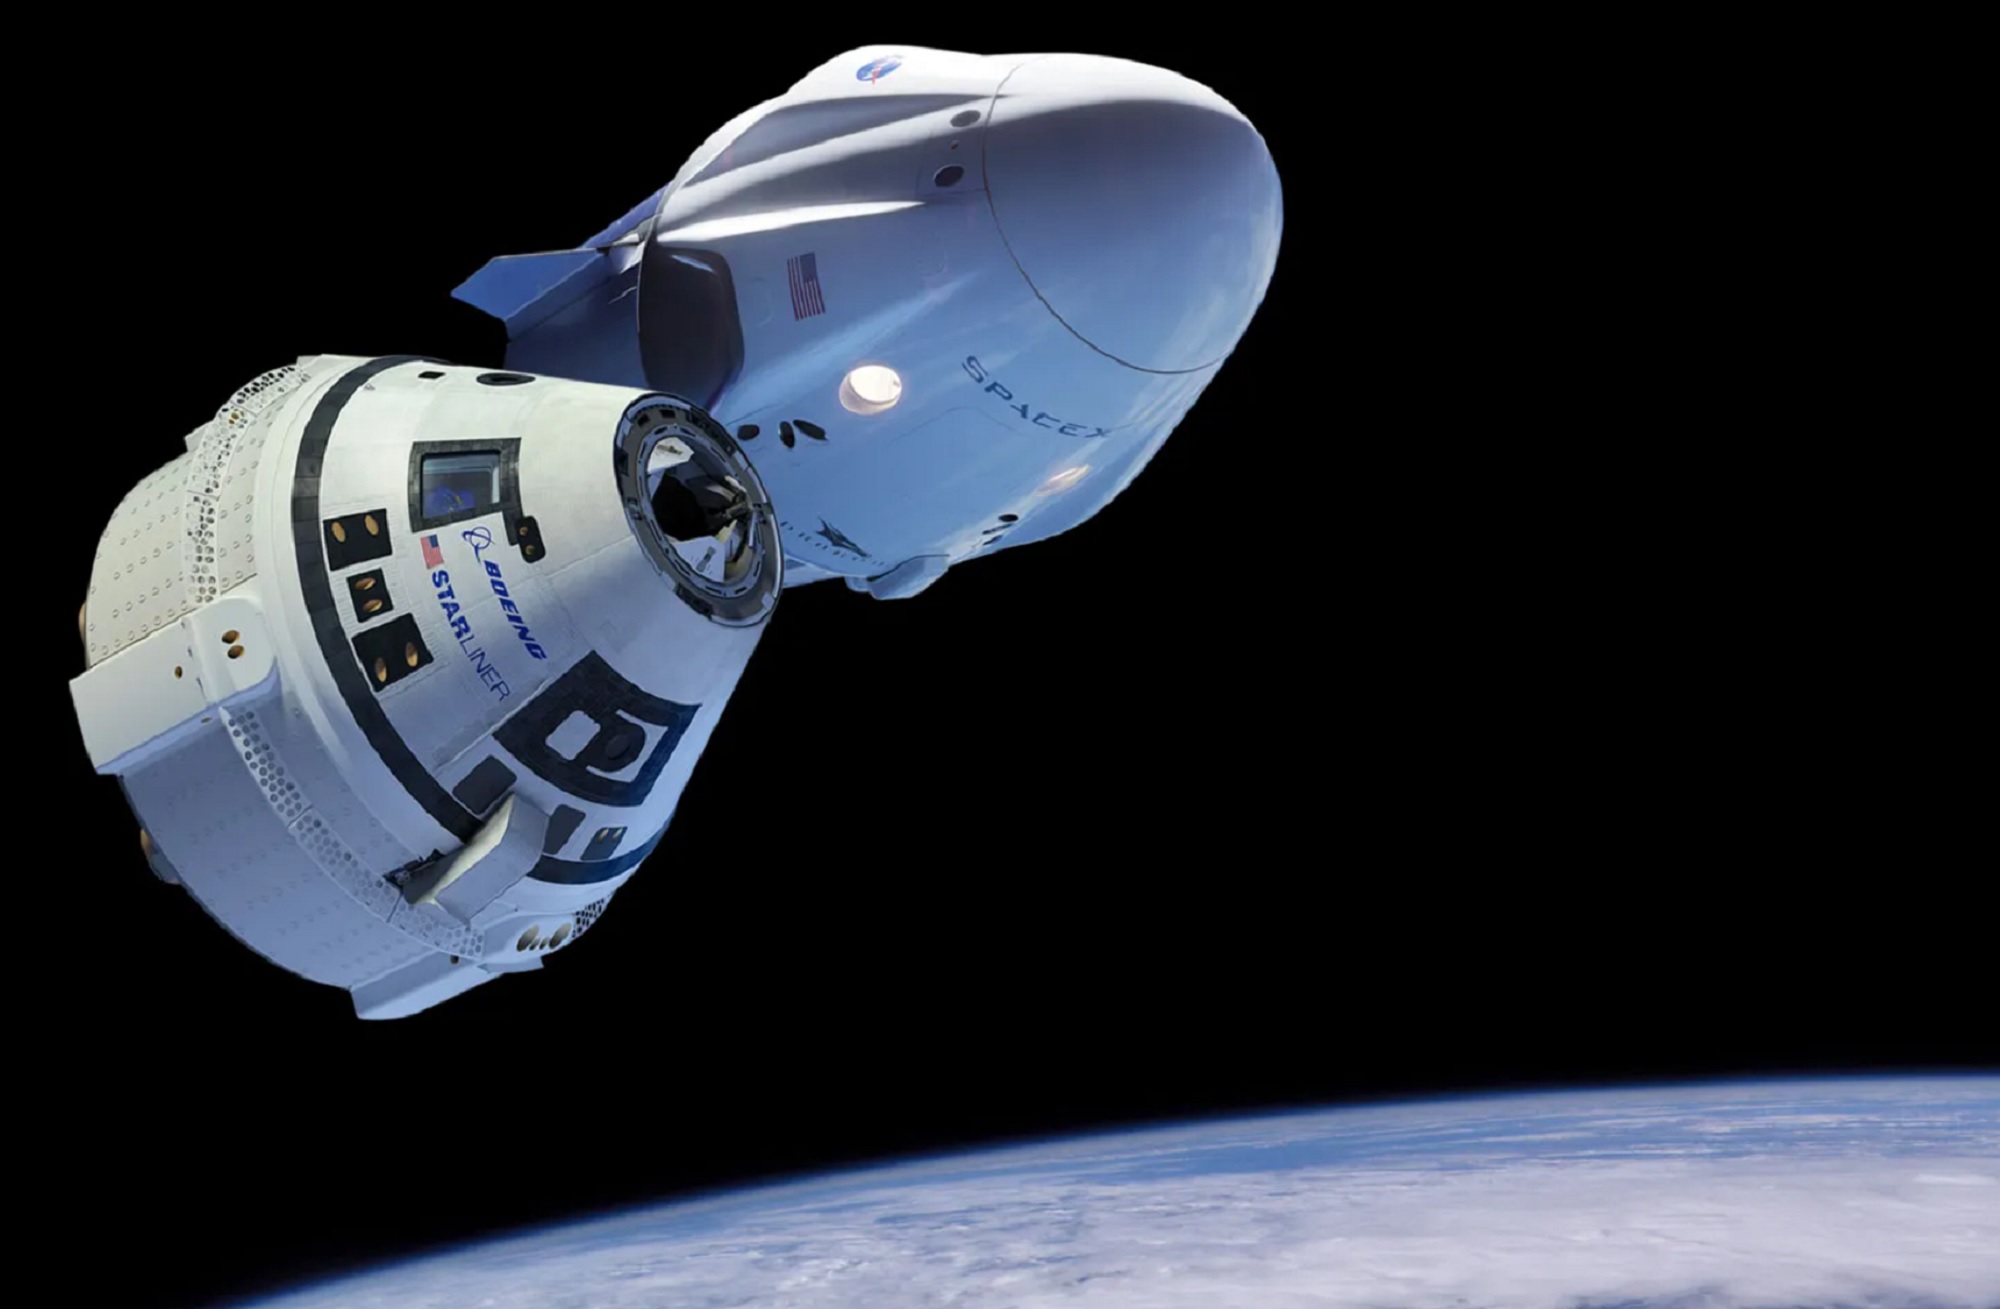 Dark matter, Jupiter’s moons, and more: What to expect from space exploration in 2023